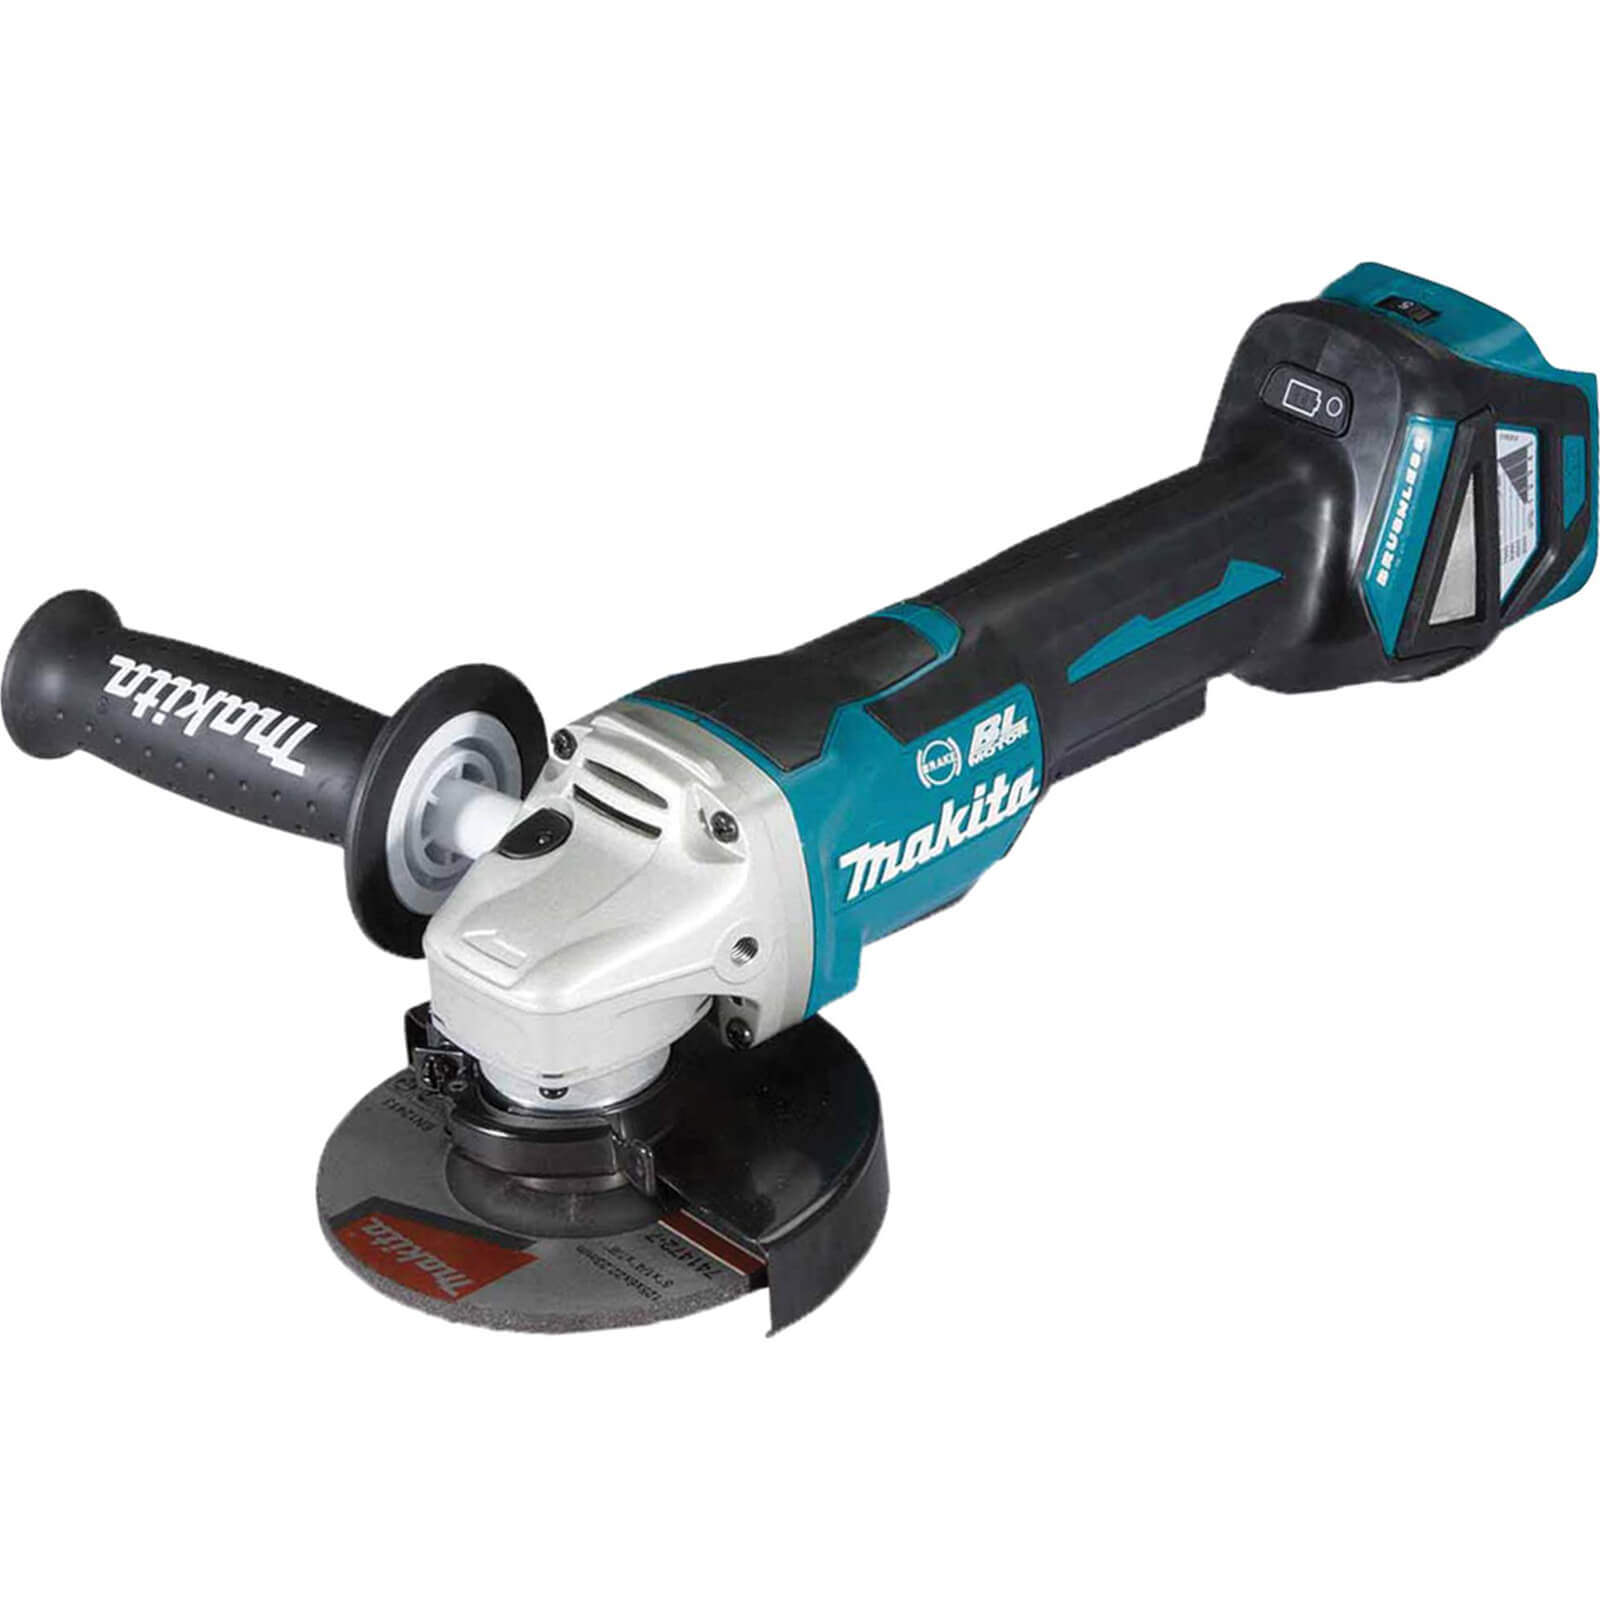 Makita DGA517 18v LXT Cordless Brushless Paddle Switch Angle Grinder 125mm No Batteries No Charger No Case